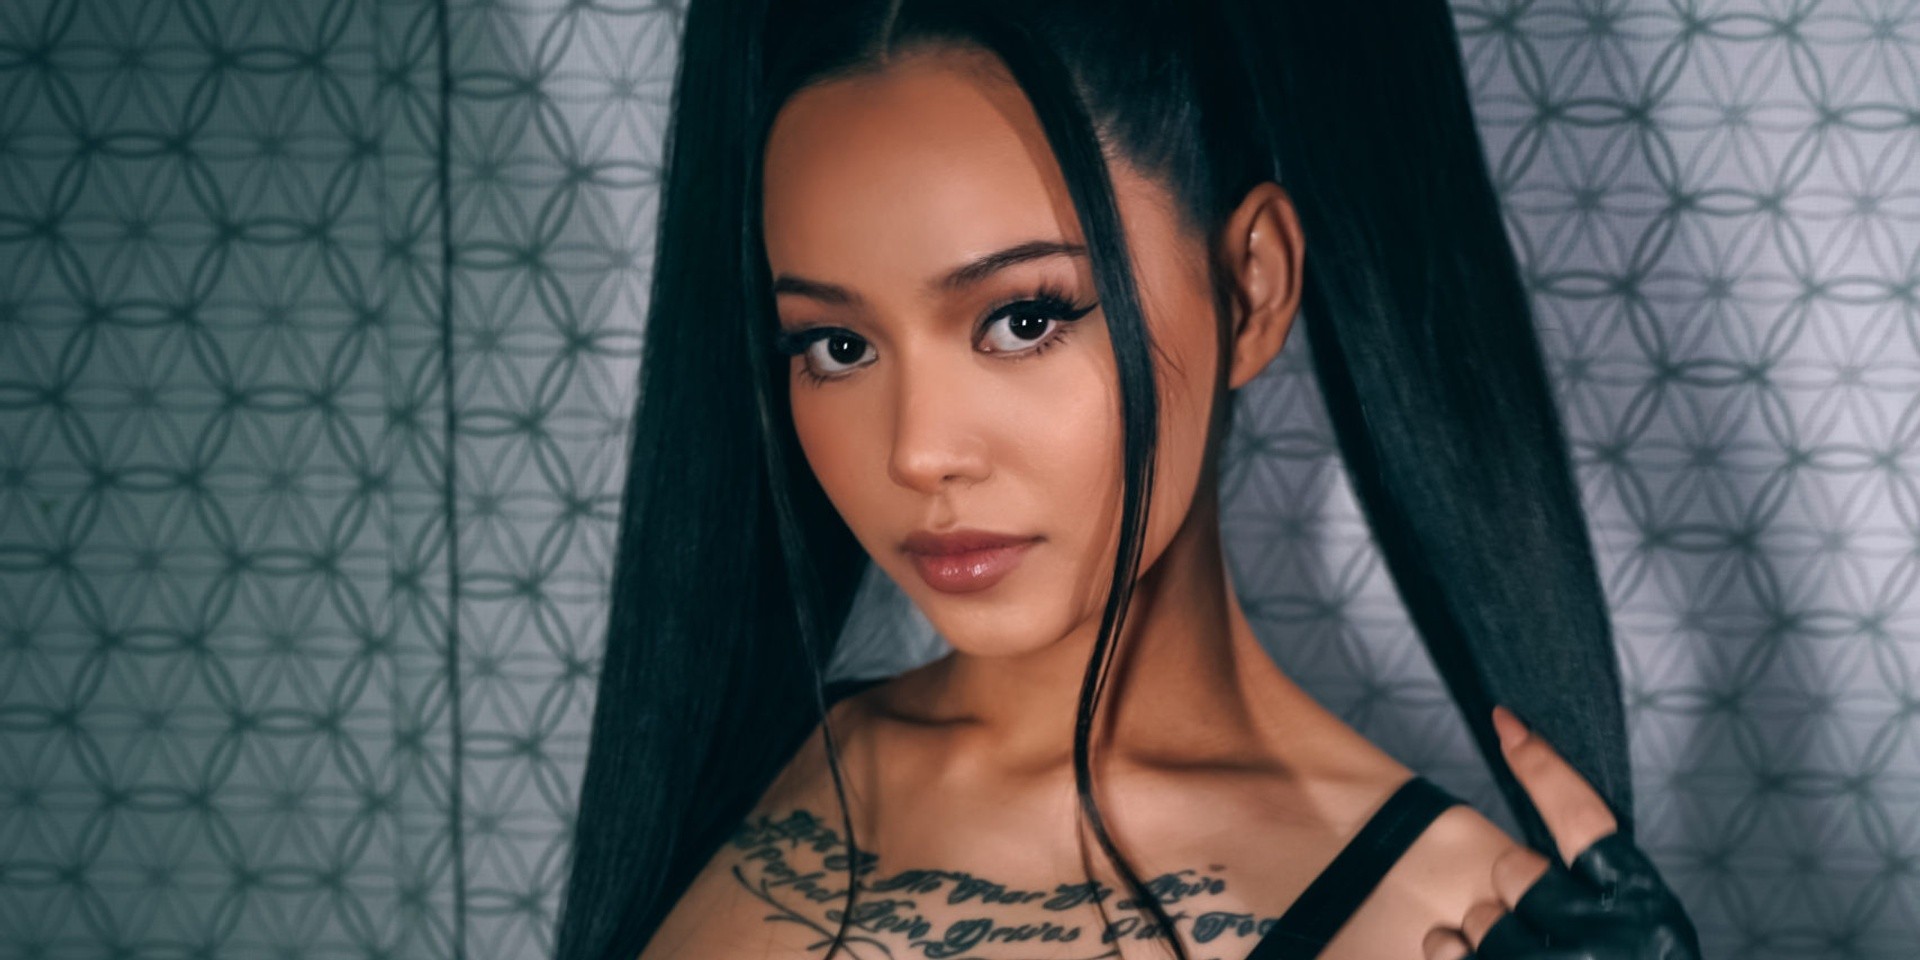 TikTok star Bella Poarch signs to Warner Music, unveils music video for debut single – watch